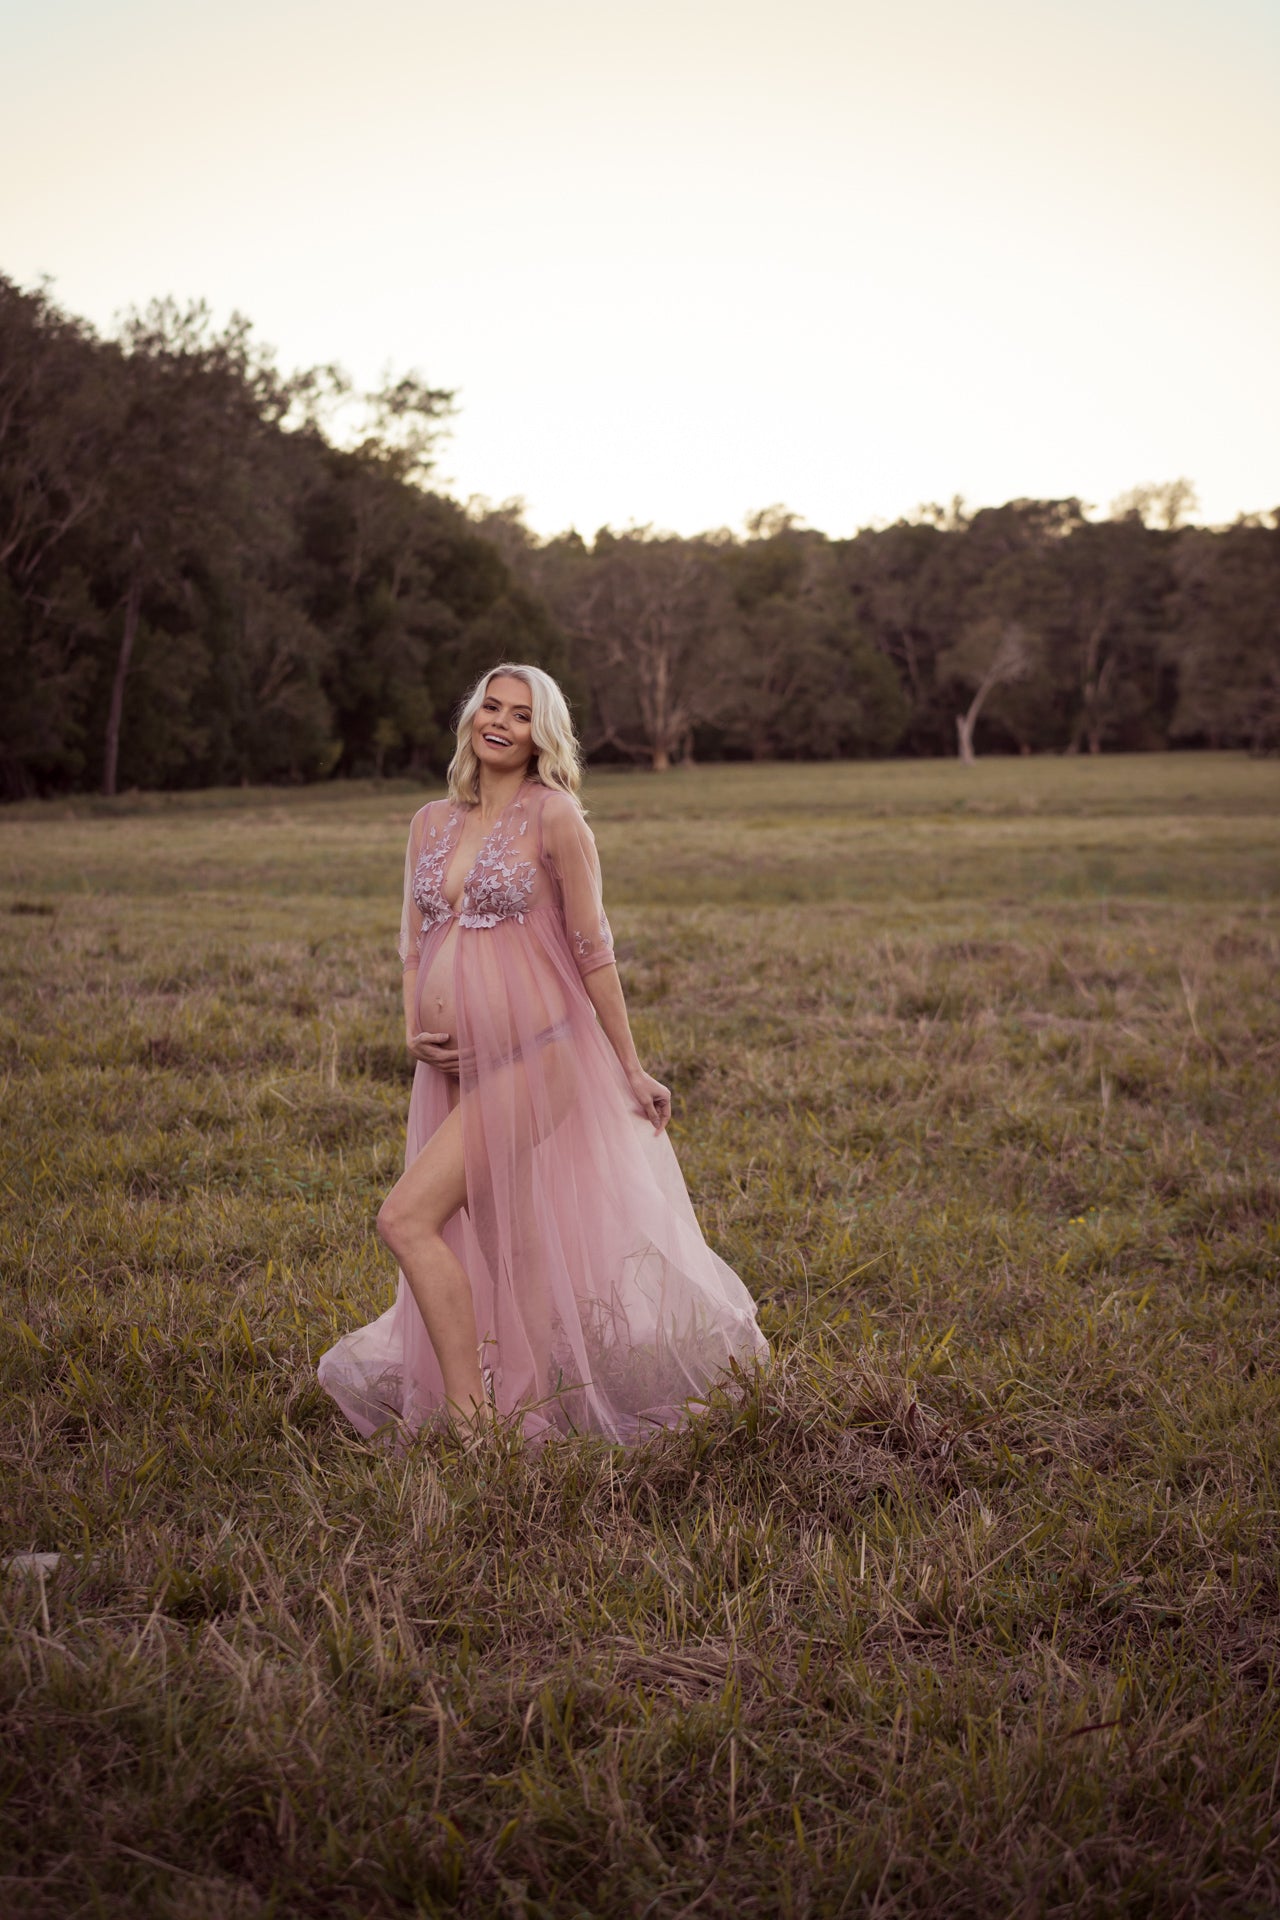 Mauve Lace Tulle Gown for Maternity Photography Photo Shoot